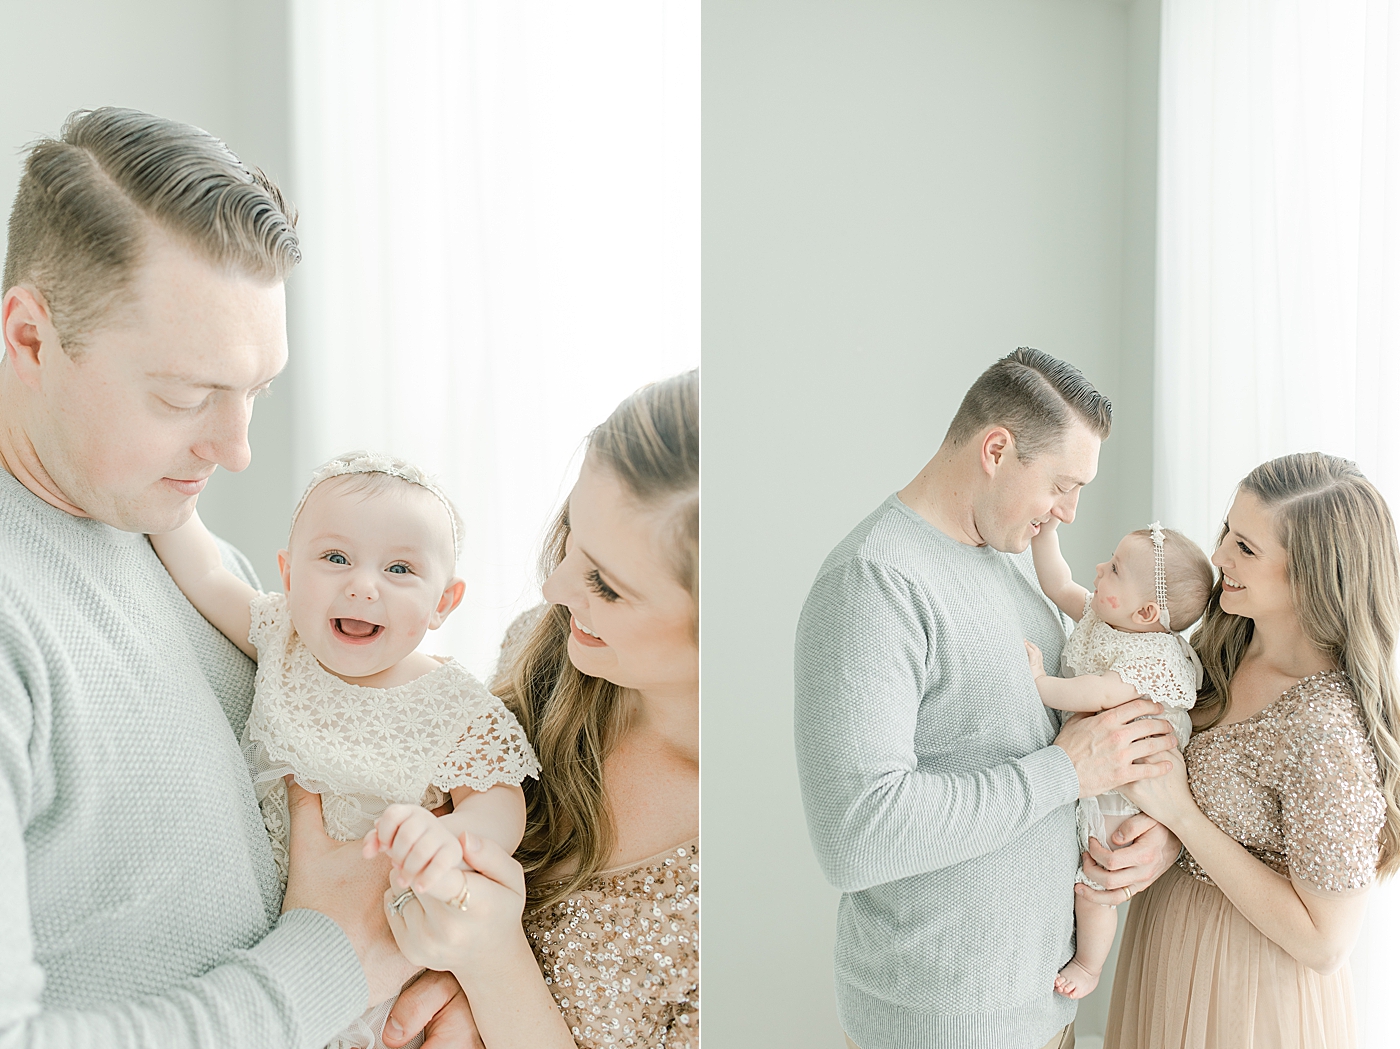 Detail of baby girl held by her mom and dad | Photo by Little Sunshine Photography